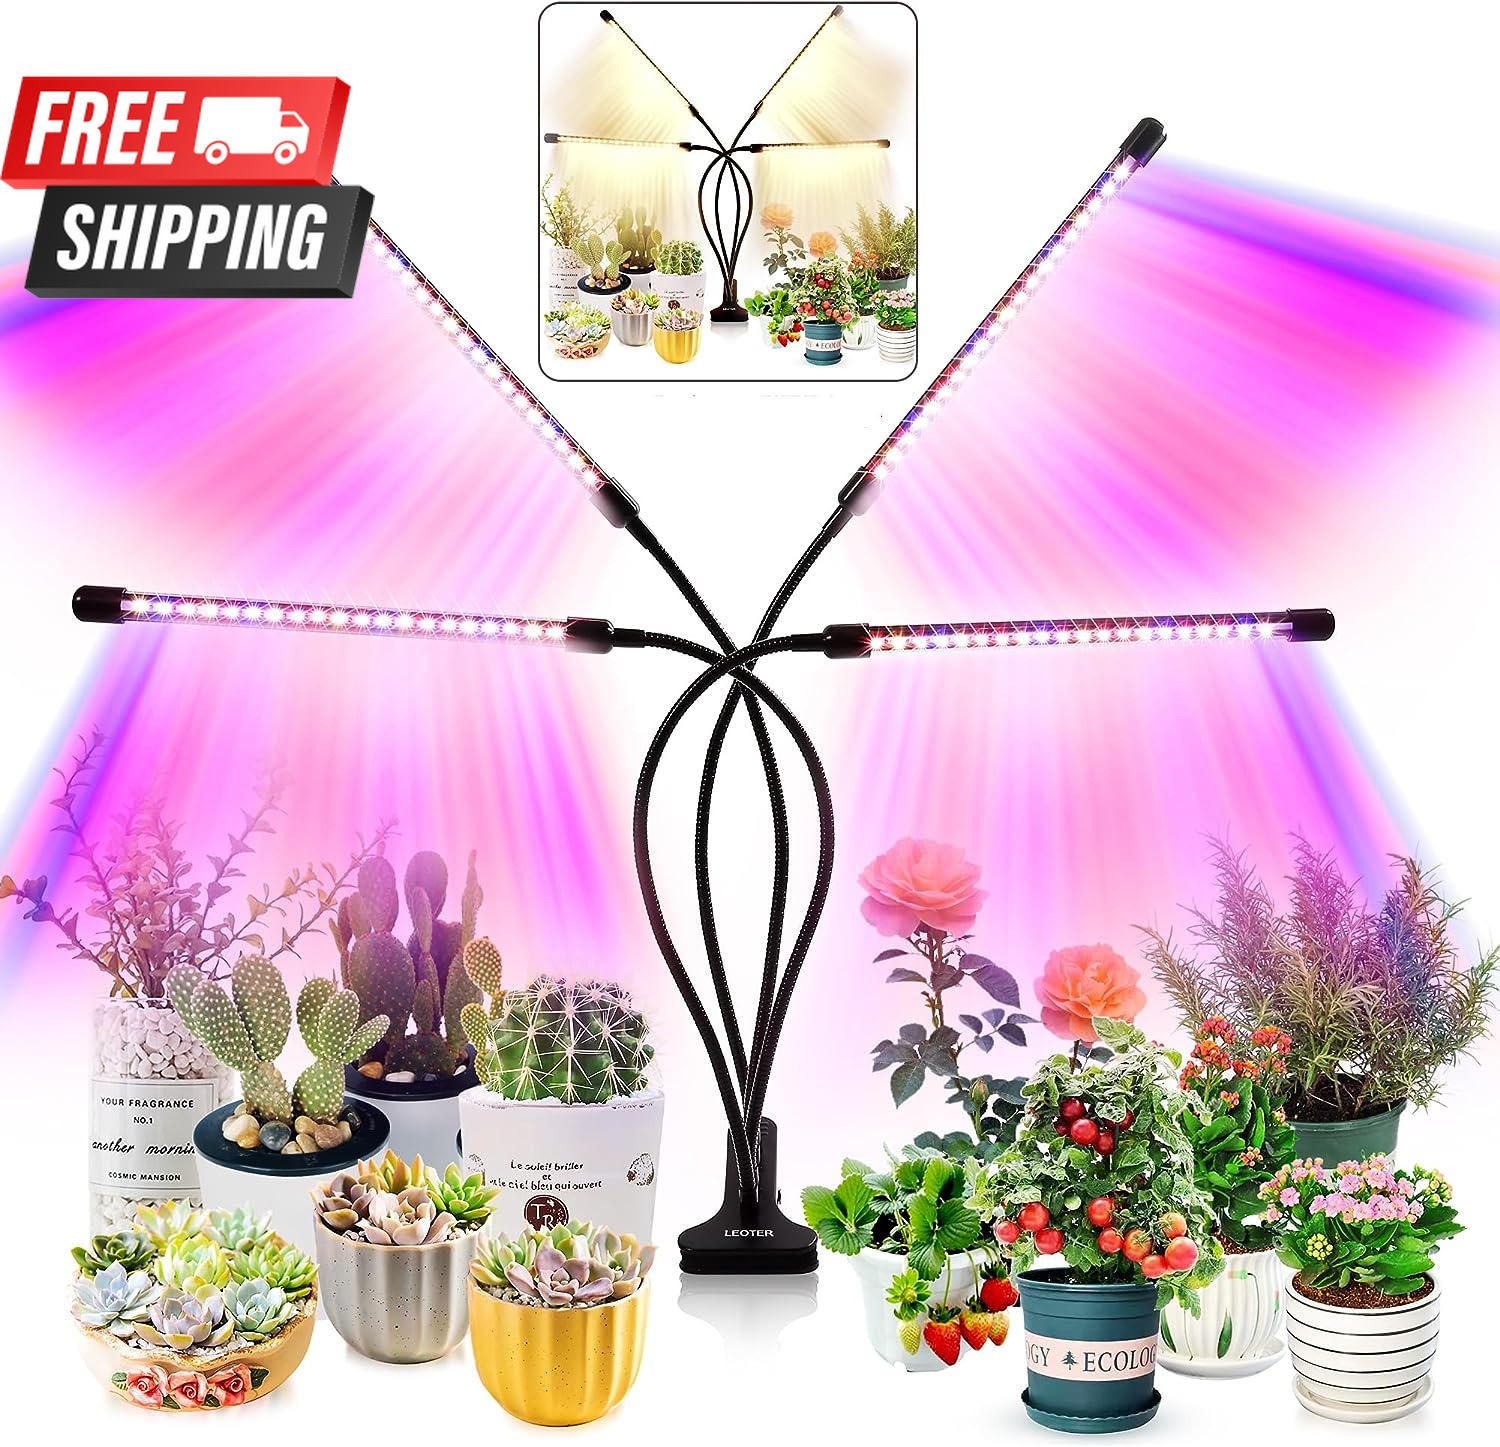 Grow Light for Indoor Plants - Upgraded Version 80 LED Lamps with Full Spectrum 